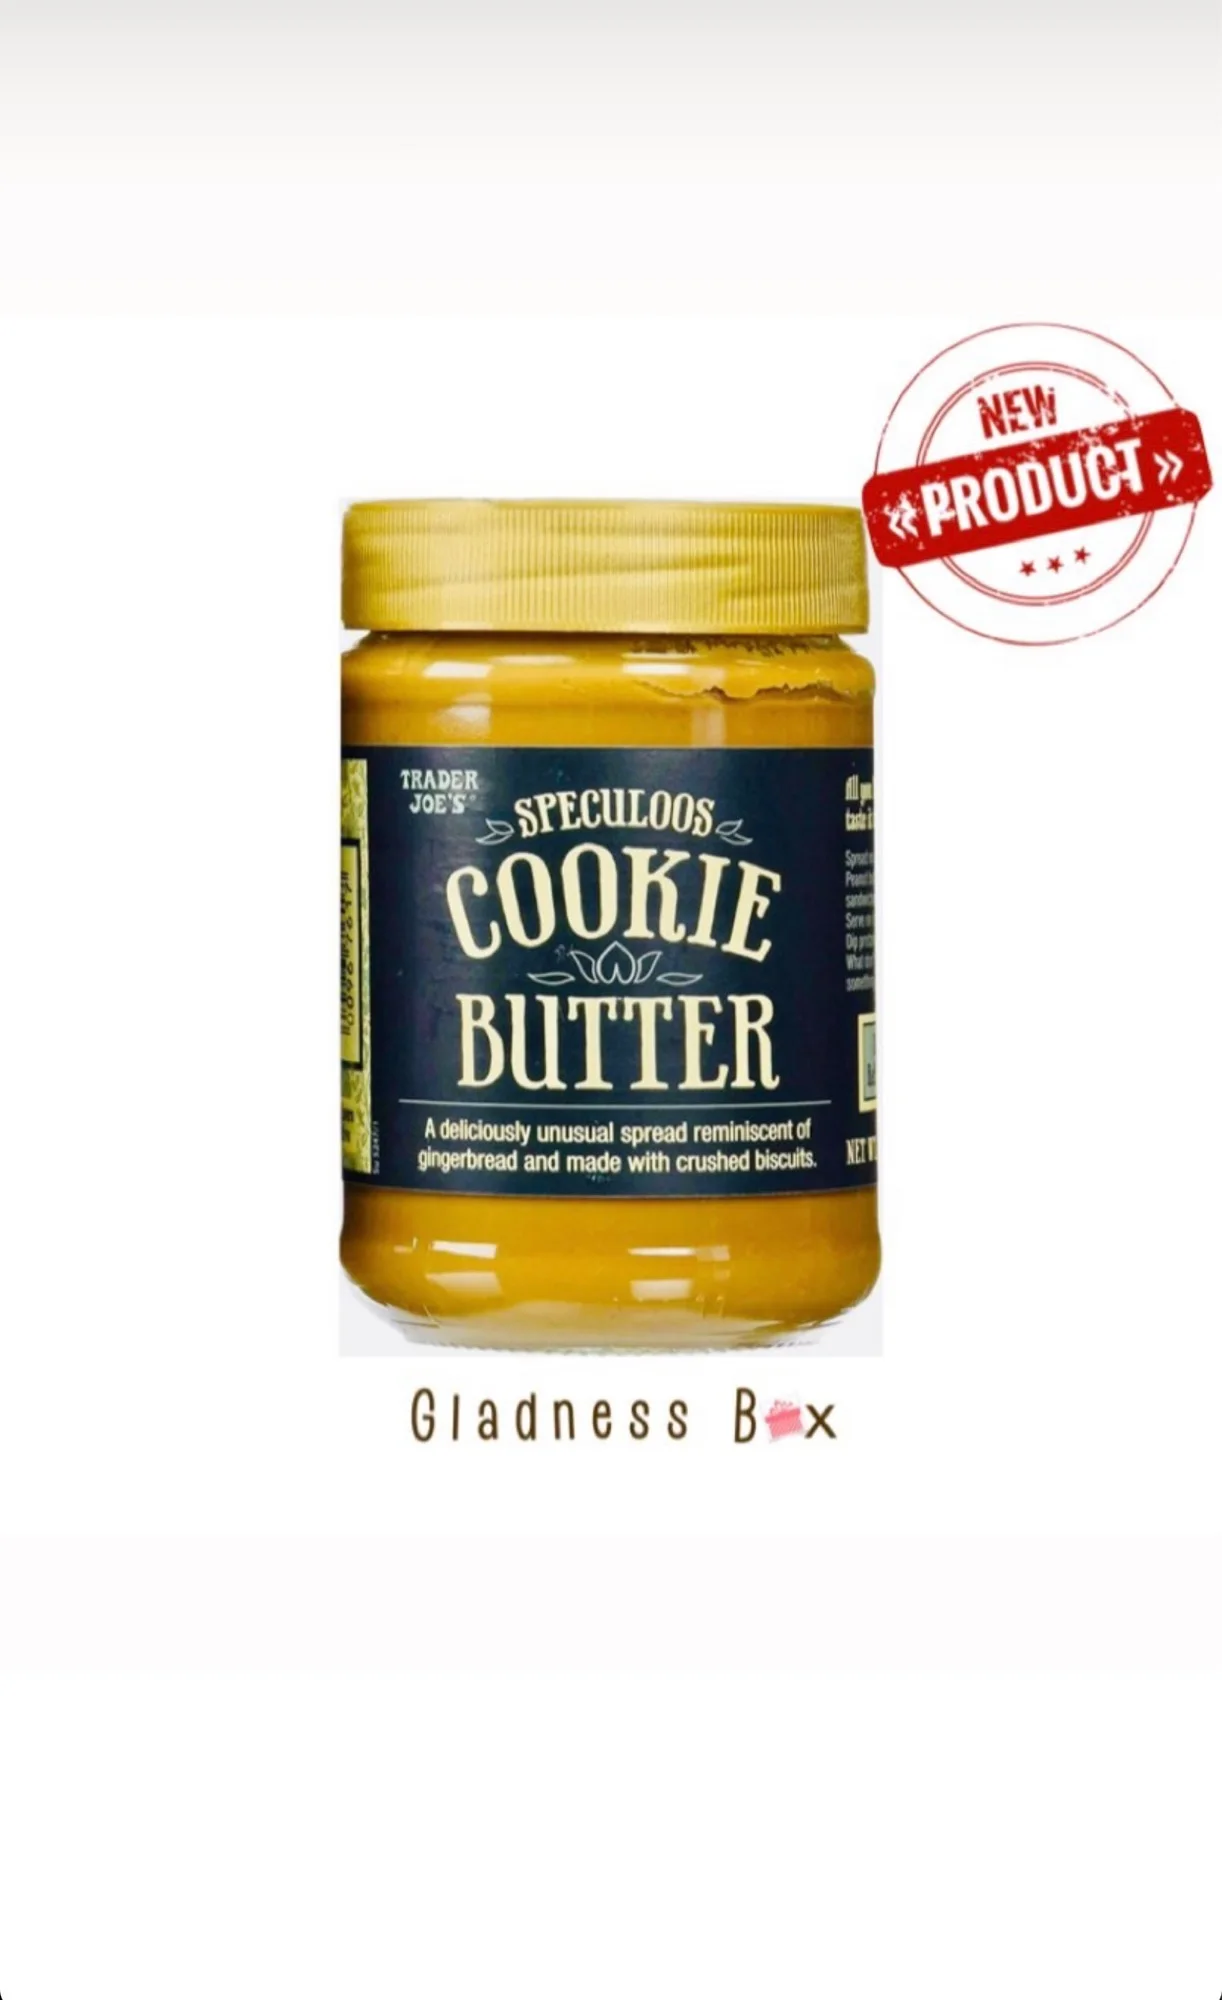 Trader Joe's Speculoos Cookie Butter Net Wt. 14.1oz (400g) - Gladness Box